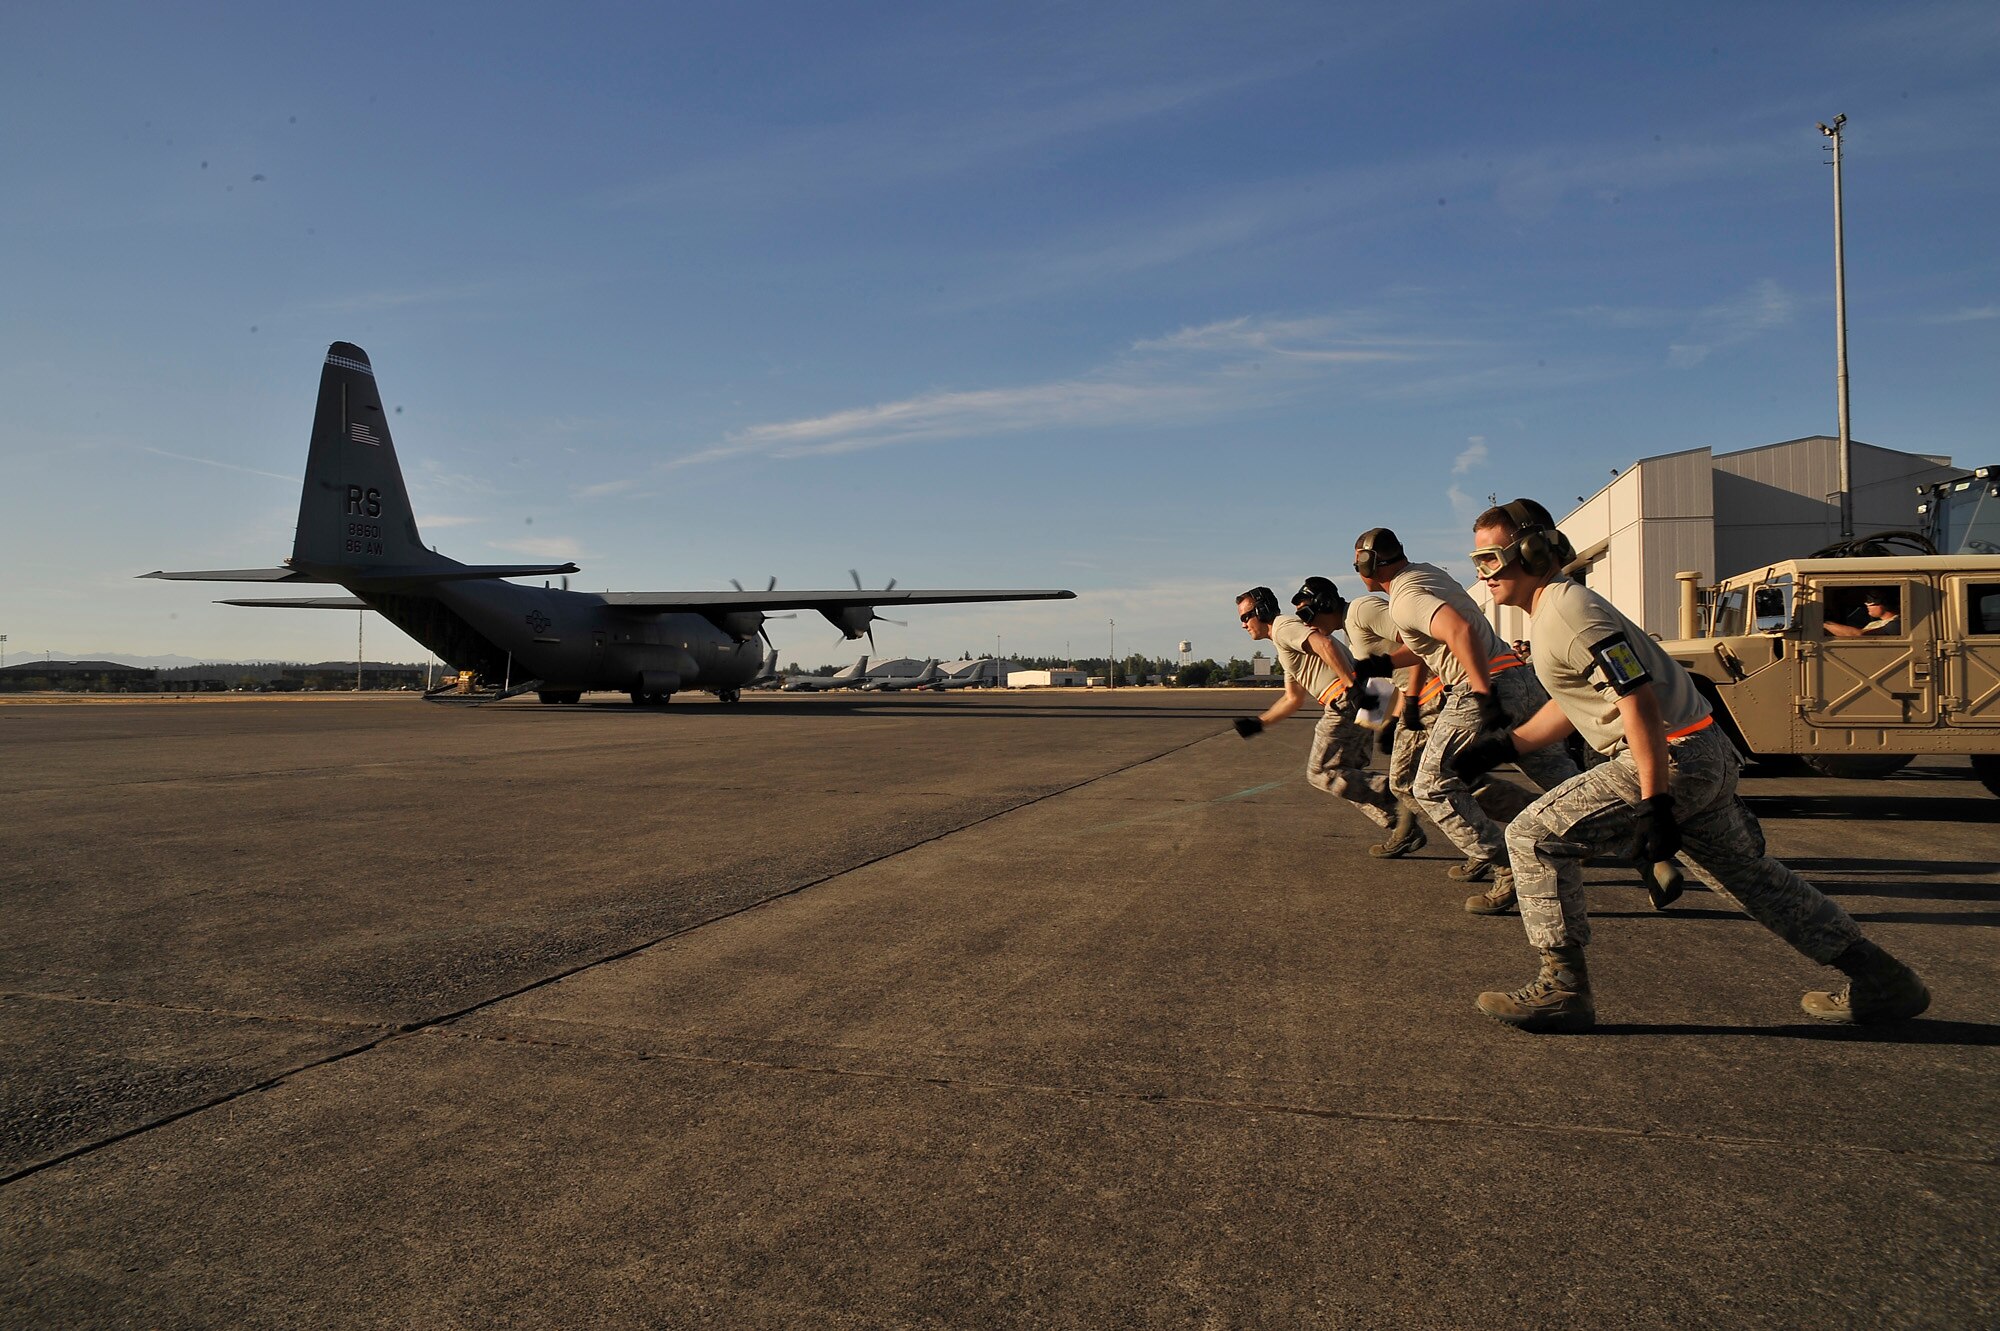 The Aerial Port team from the 435th Contingency Response Group races off to rapidly load a HMMVV, trailer and pallet in the back of C-130 with its engines running during the Air Mobility Command Rodeo 2009 competition at McChord Air Force Base, Wash. More than 50 Airmen from Team Ramstein were part of the 2,500 servicemembers from around the Air Force and the globe participating in the rodeo. The competition, which went from Jul 19 to 24, is a bi-annual mobility readiness exercises that brings teams together to compete in more than 50 judged events spanning the categories of aerial port, aeromedical evacuation, aircrew, fit to fight, maintenance and security forces.  (Courtesy photo).